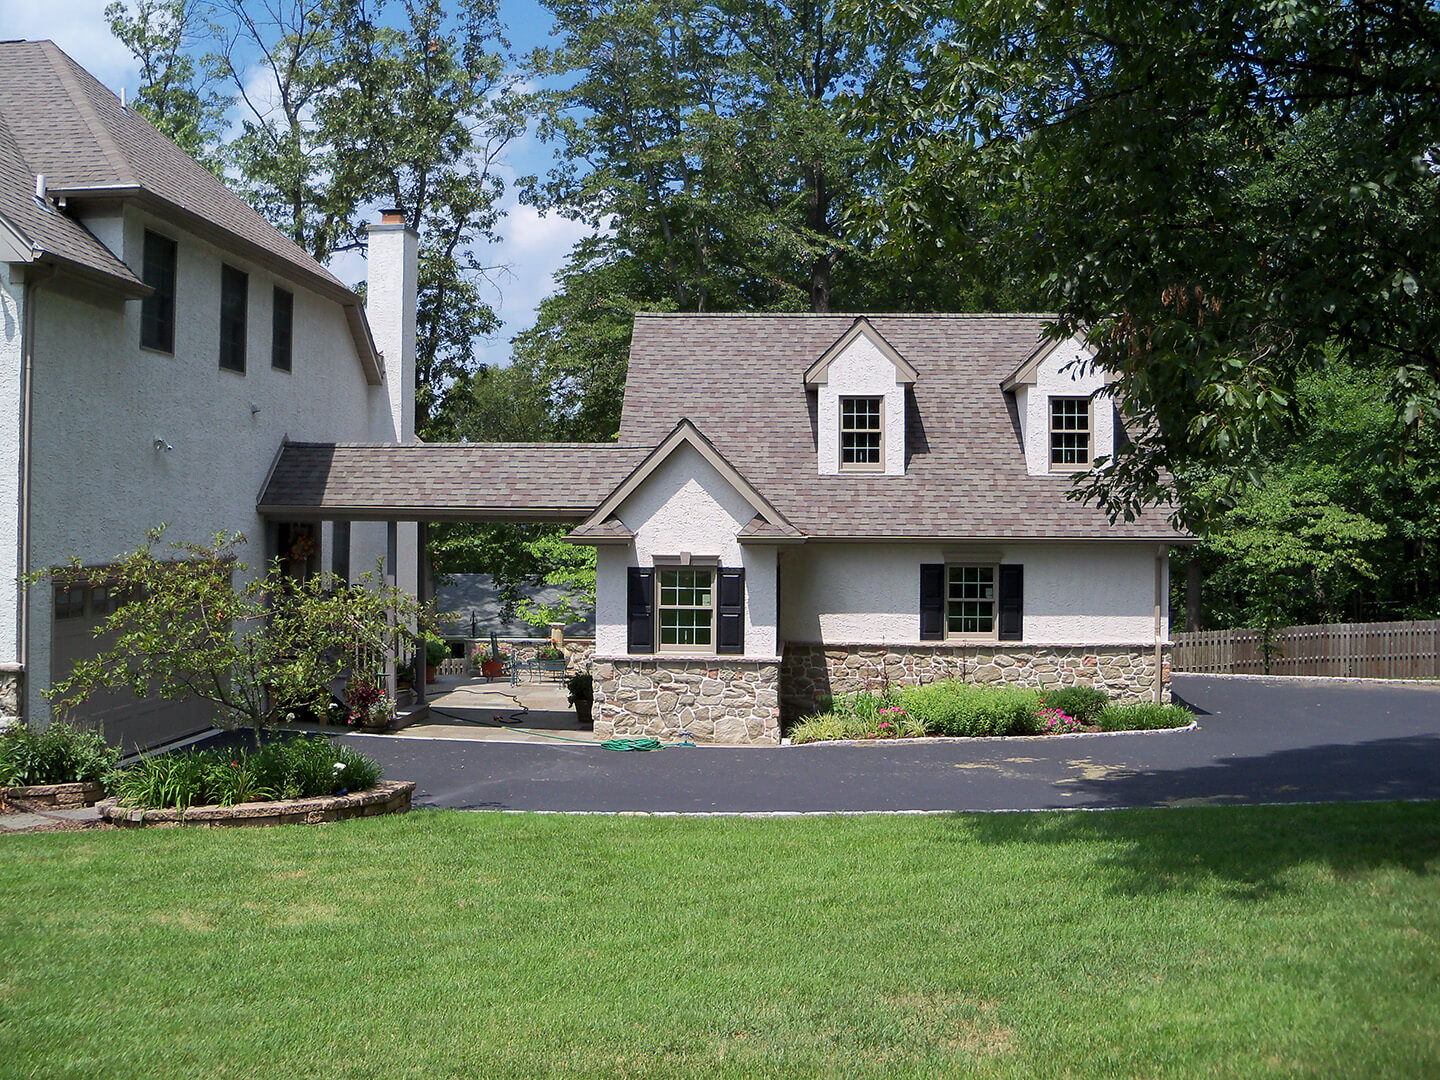 attached stucco and stone custom garage with walkway to house in cape cod style